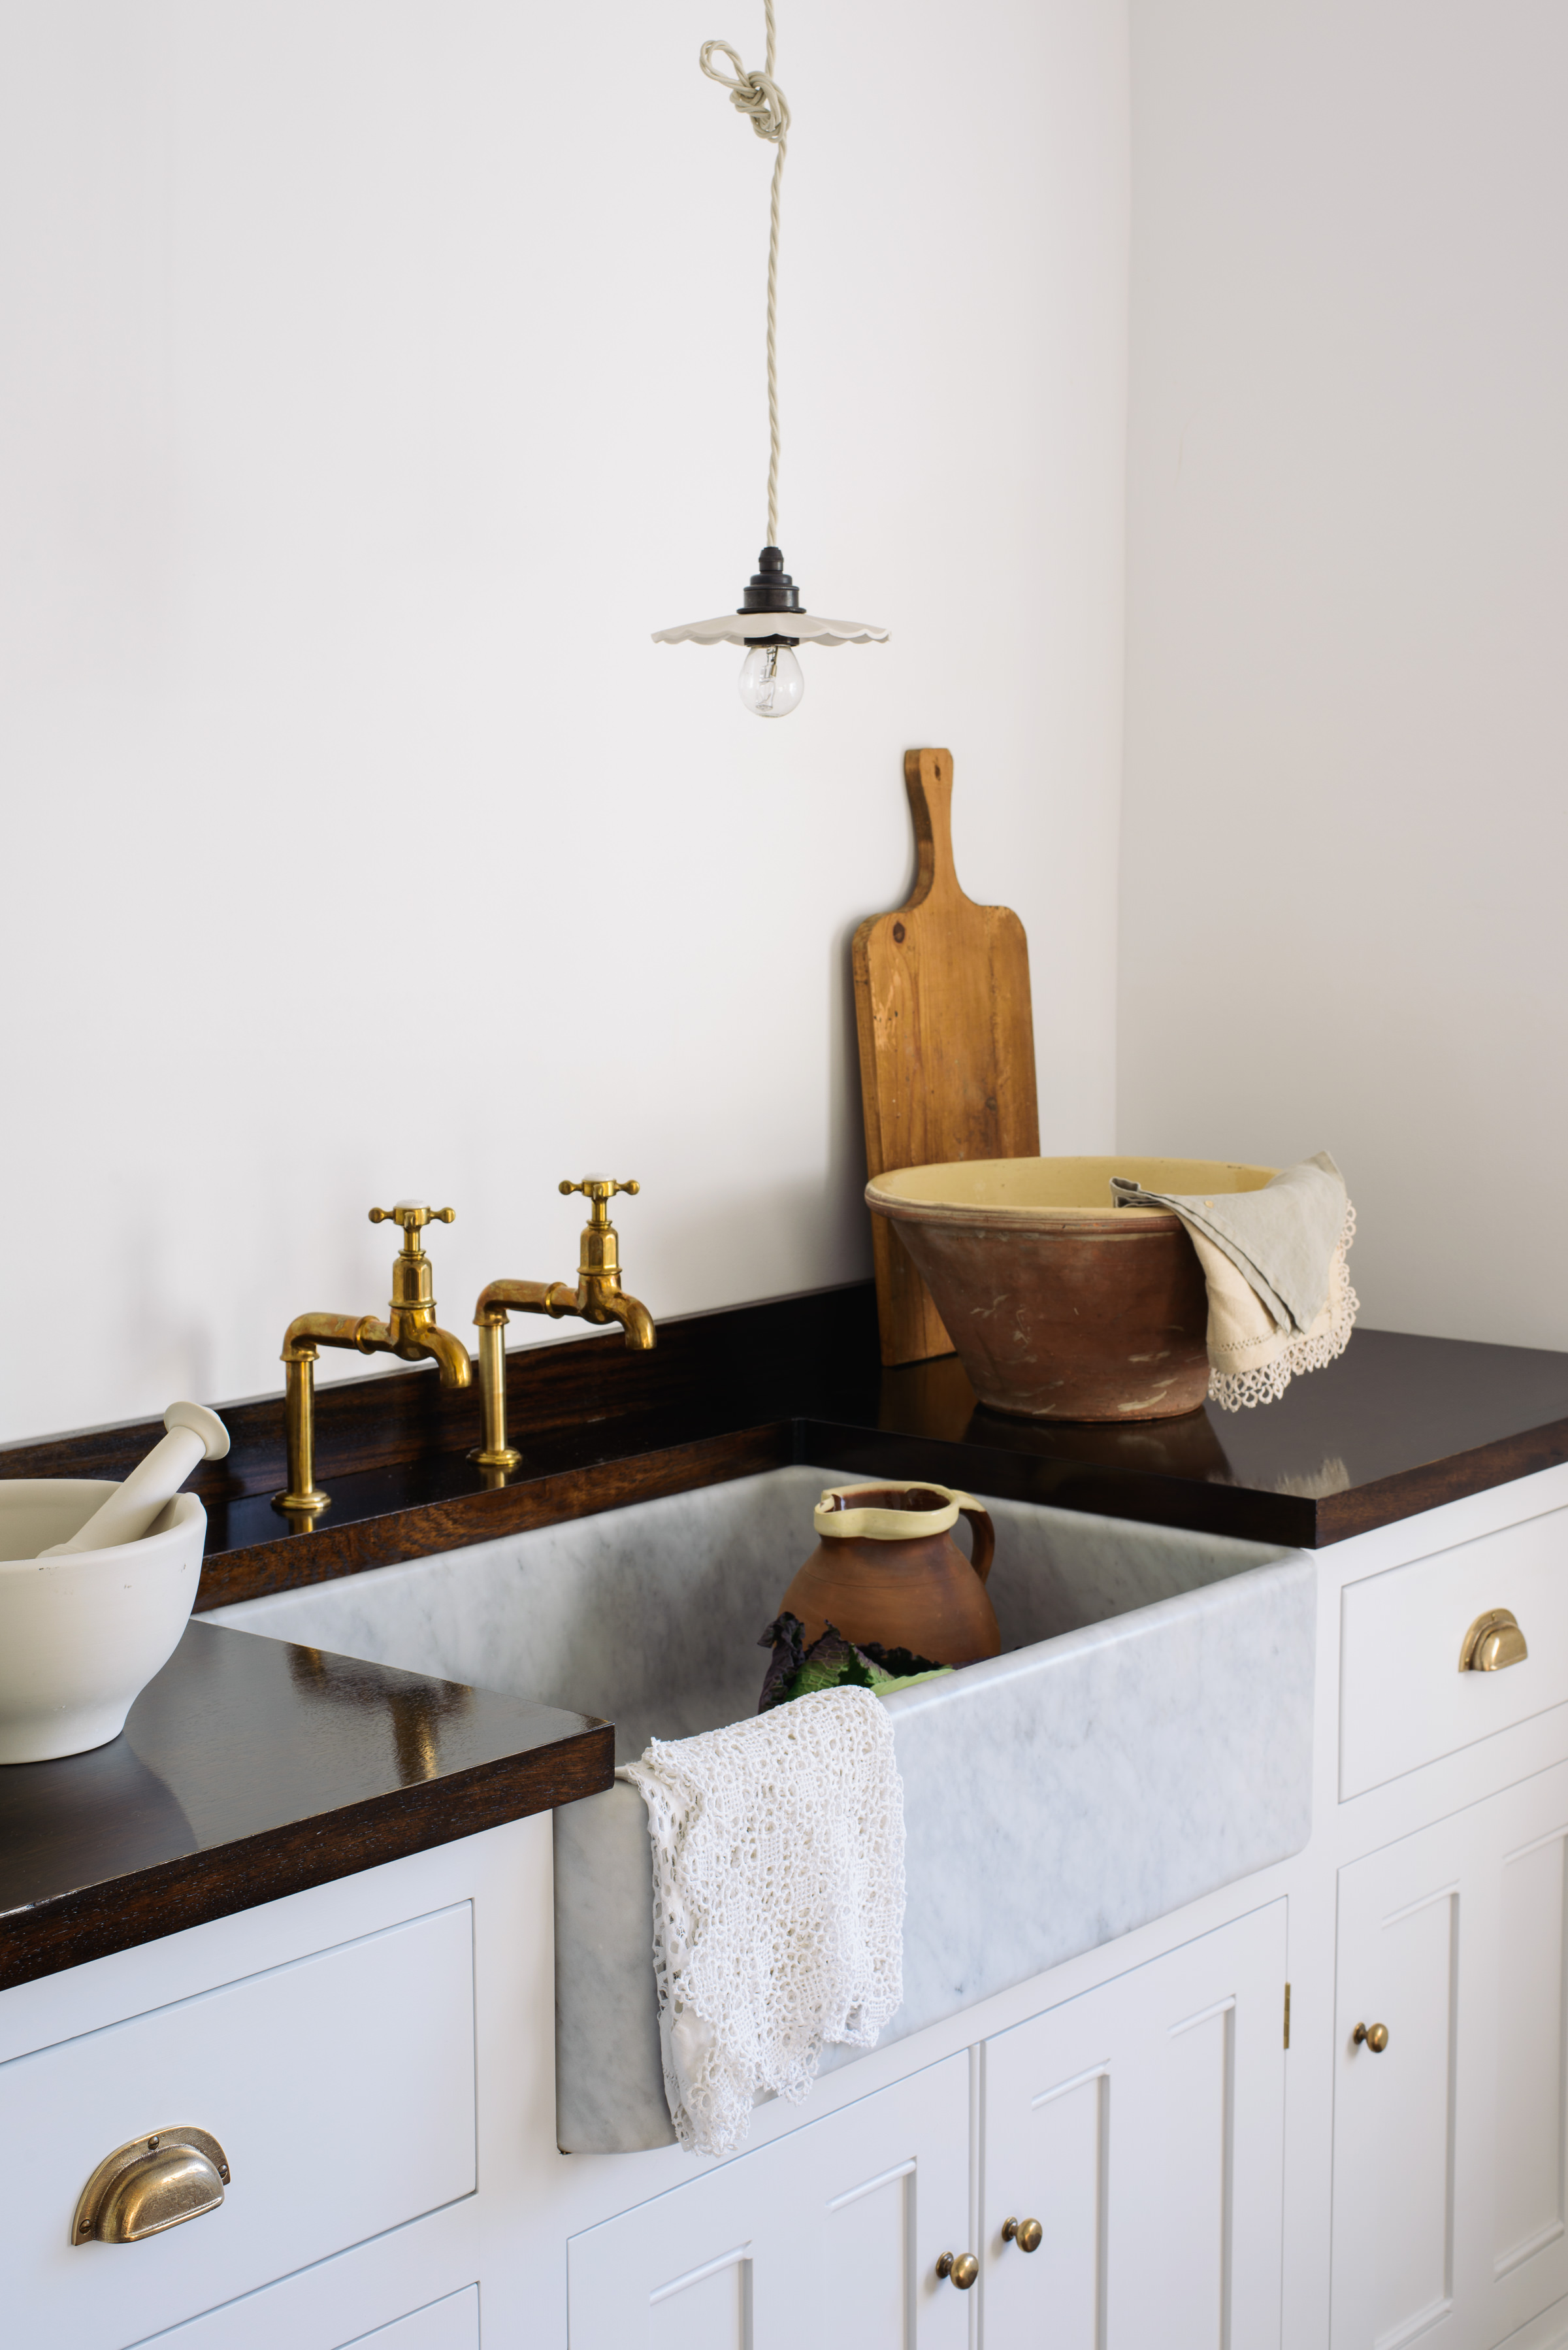 Glossy hardwood worktops work perfectly withe the marble sinks, a lovely rich contrast and a timeless look